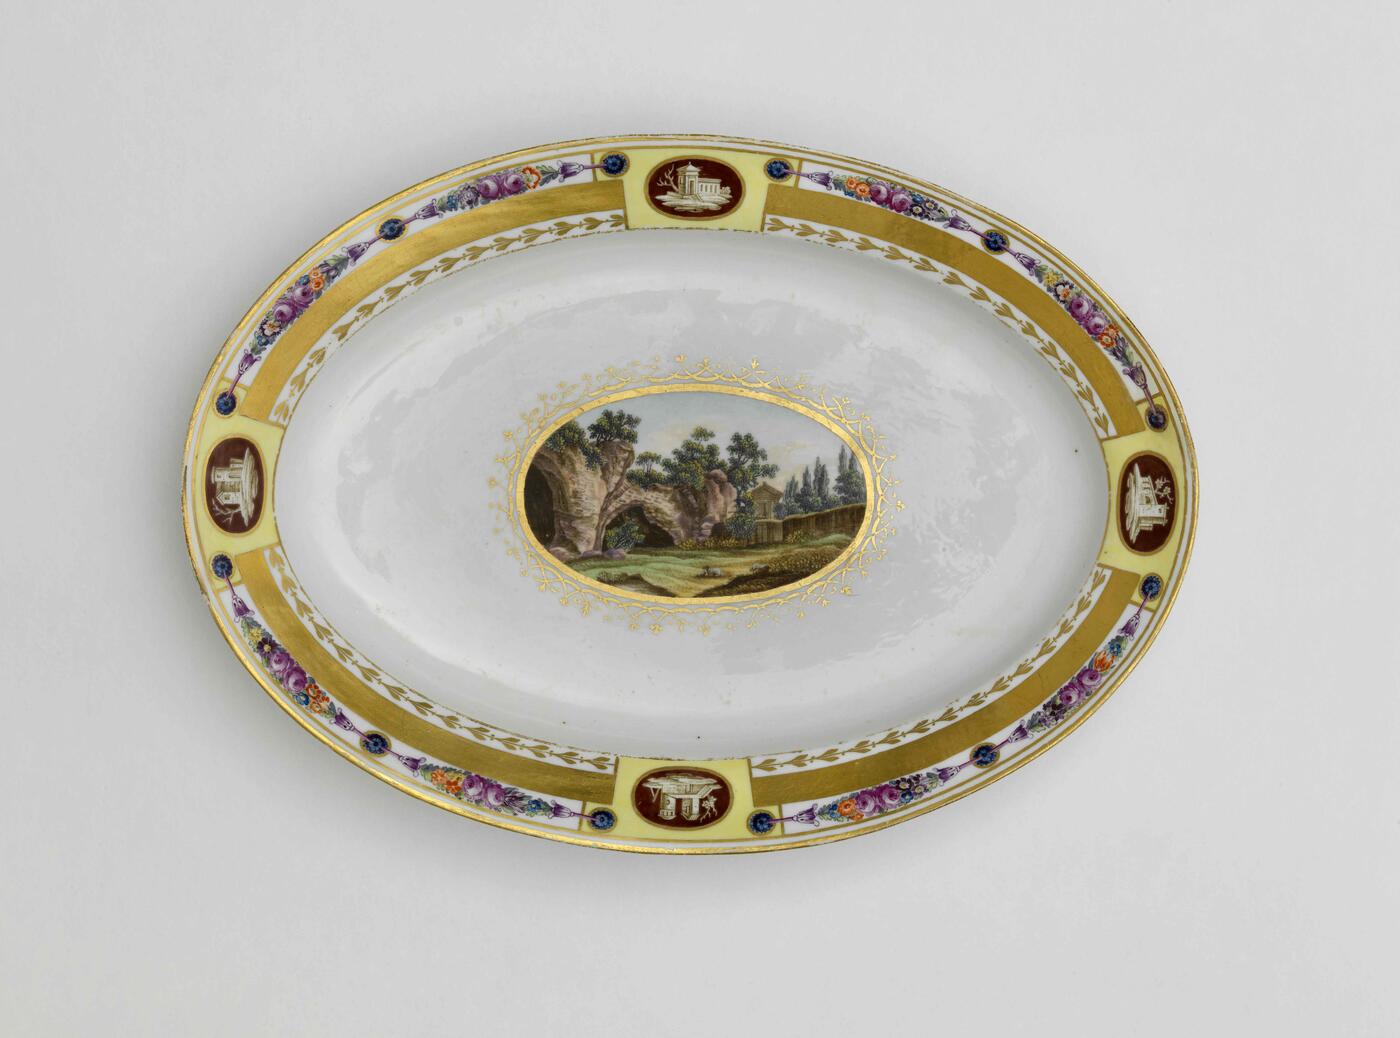 IMPERIAL PORCELAIN MANUFACTORY, ST PETERSBURG, PERIOD OF ALEXANDER I (1801-1825)